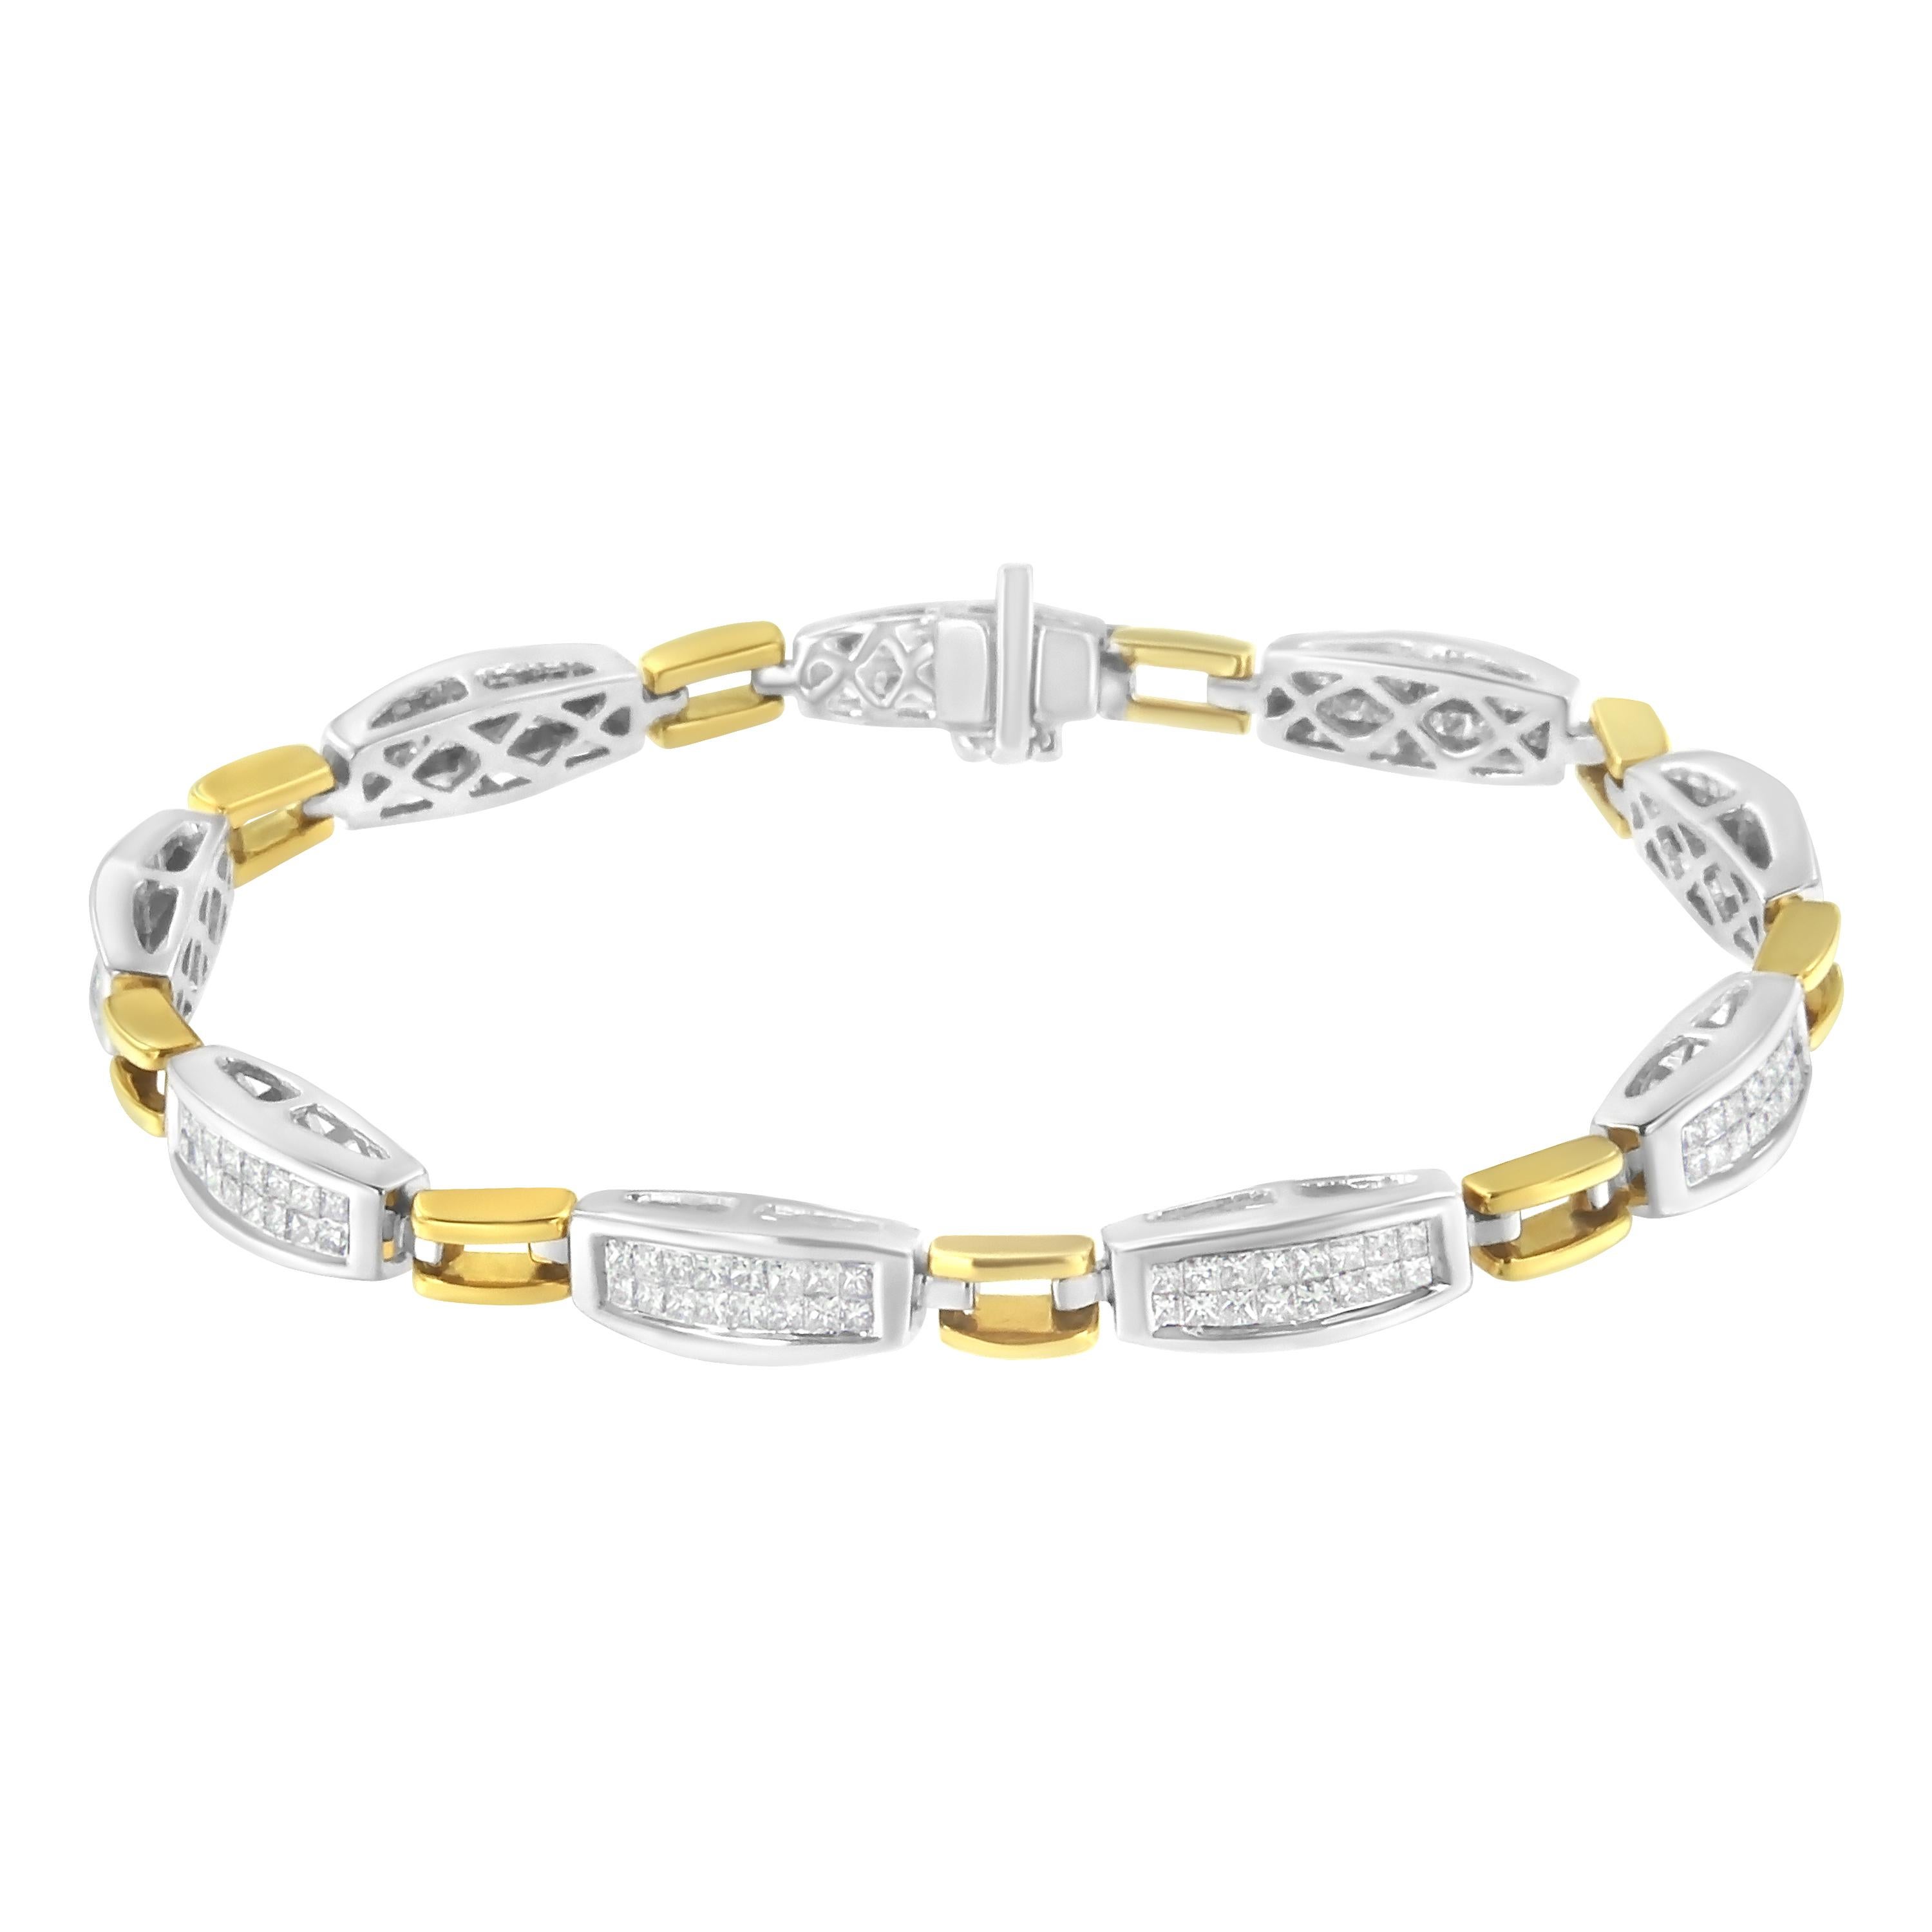 You can't go wrong with this 14k yellow and white gold link bracelet. 2ct TDW in diamonds sparkle in this design that secures with a box with clasp mechanism. White gold rectangular links studded with two rows of princess cut diamonds alternate with